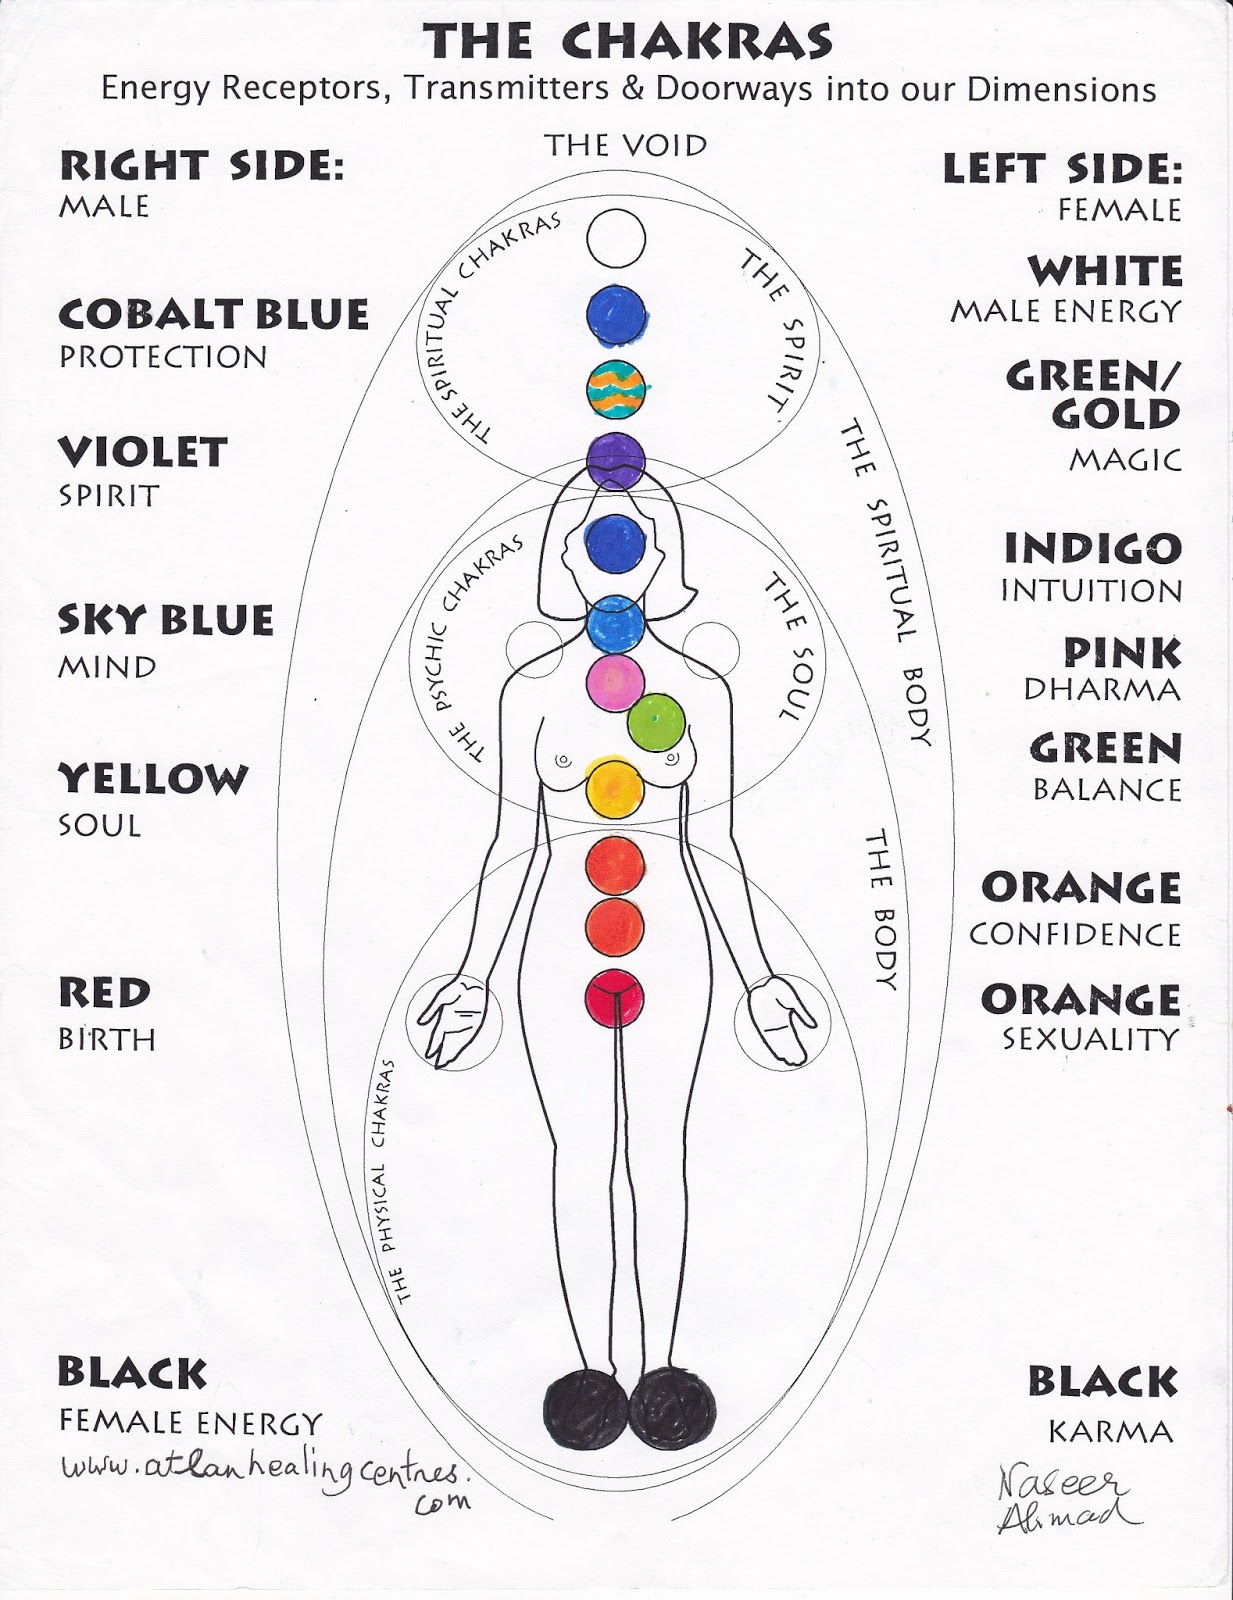 Man From Atlan: The 12 Chakra System of Healing